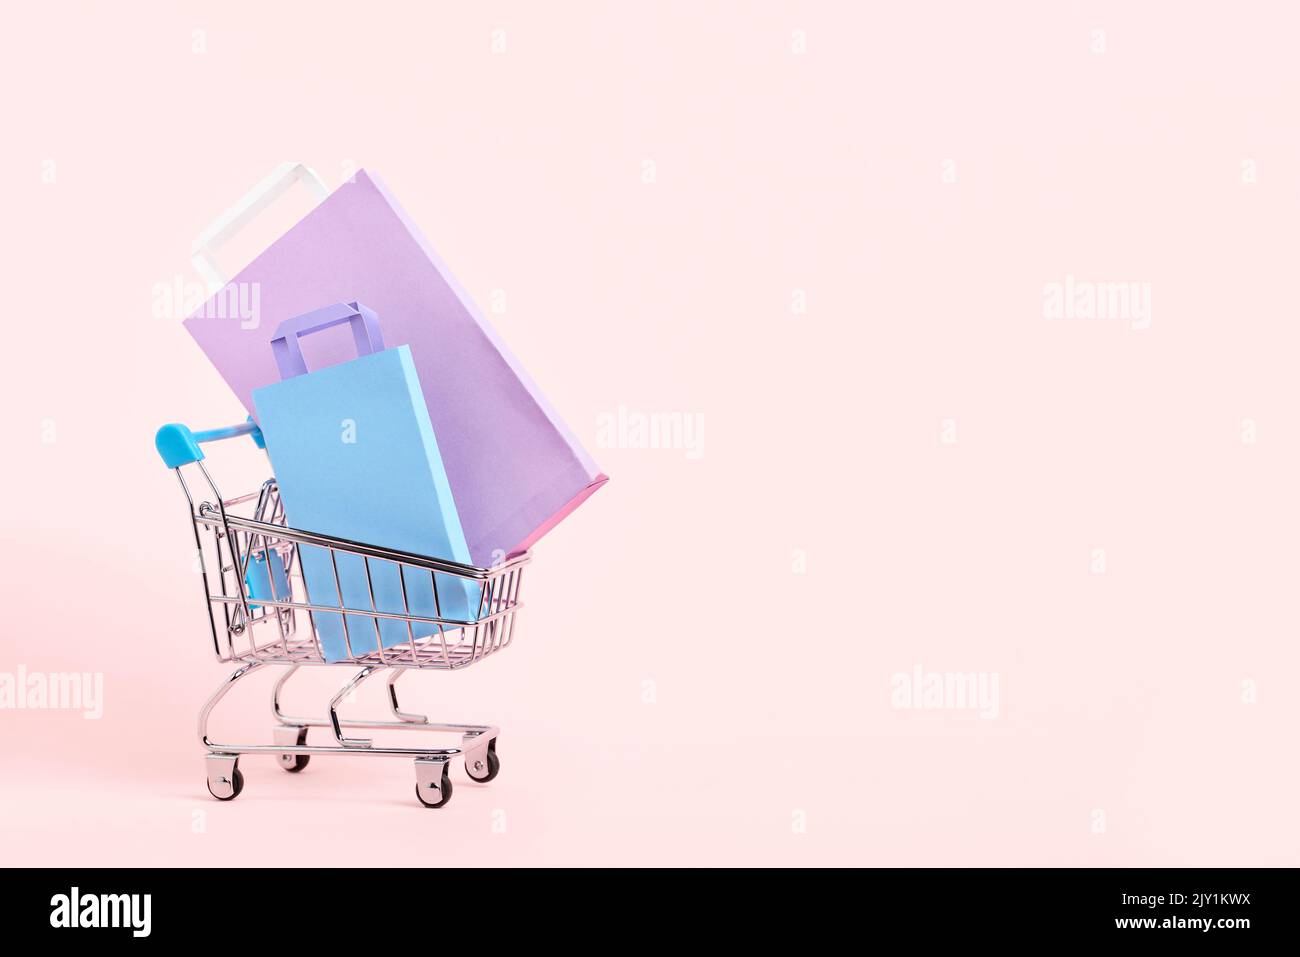 Shopping cart with purple, lilac and blue paper bags on a pastel pink background. Bright minimalist design with copy space. Concepts: market deals, se Stock Photo